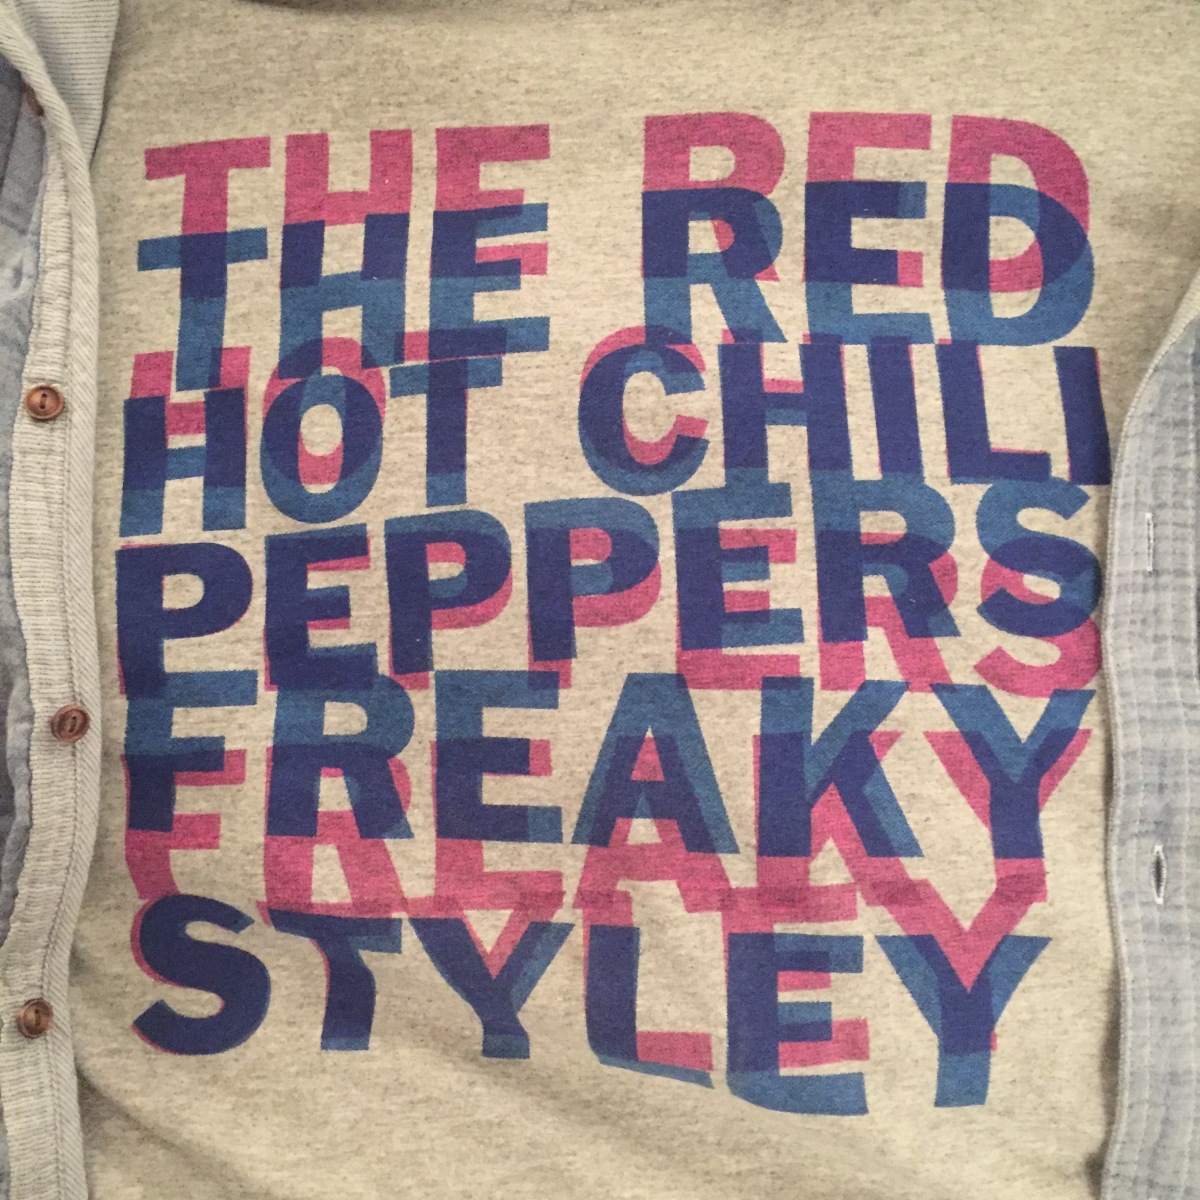 Havana Affair – Red Hot Chili Peppers